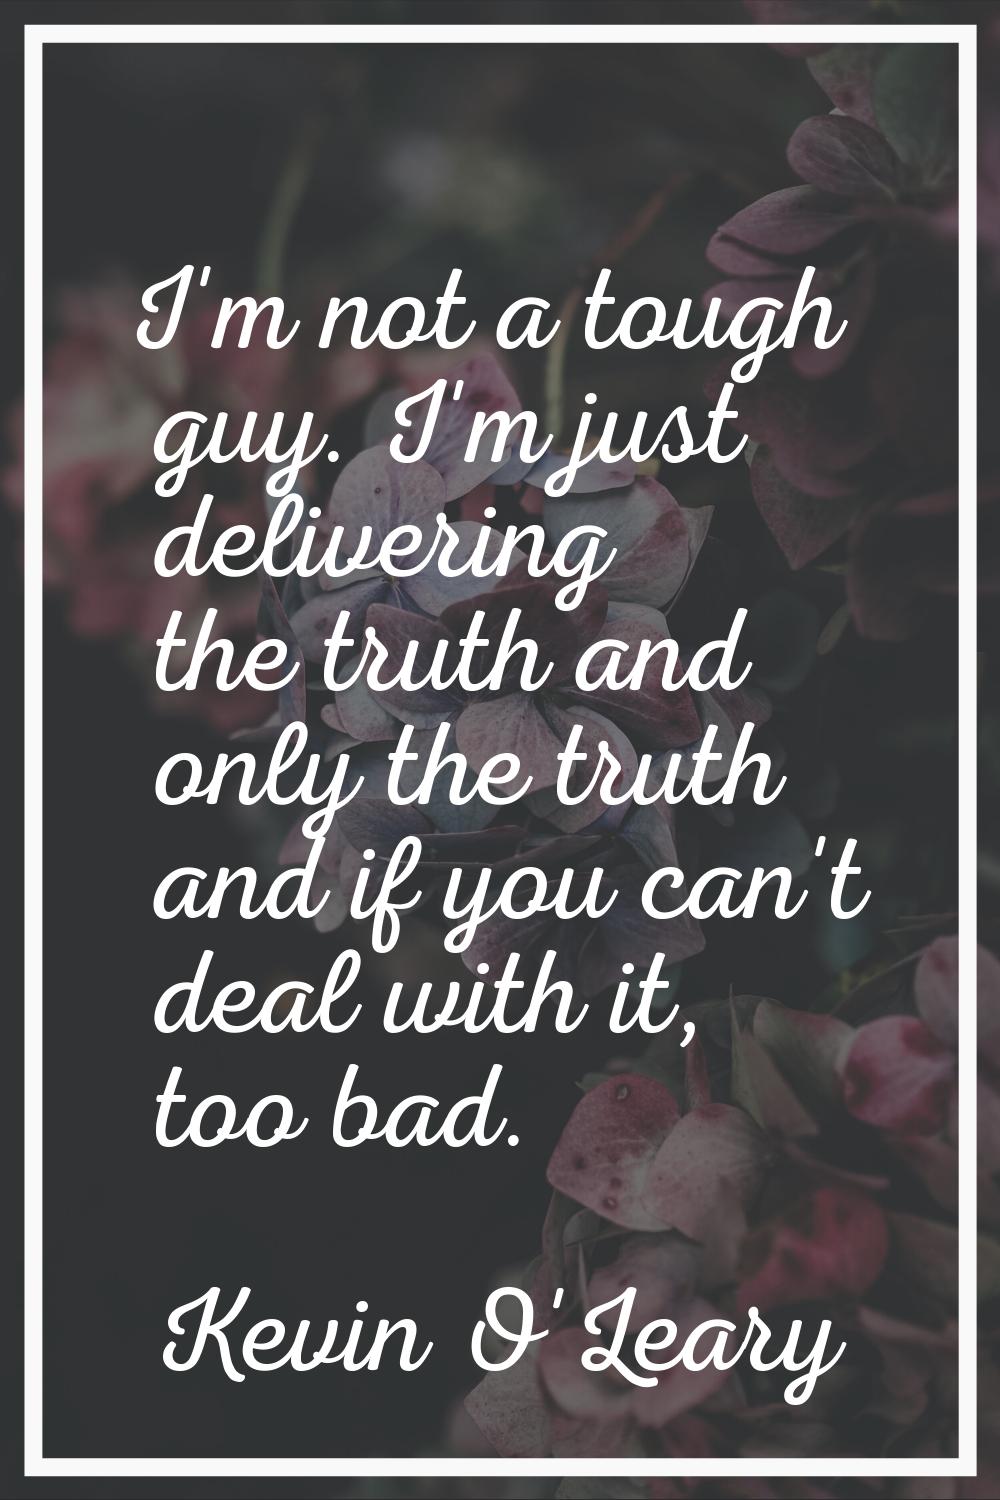 I'm not a tough guy. I'm just delivering the truth and only the truth and if you can't deal with it